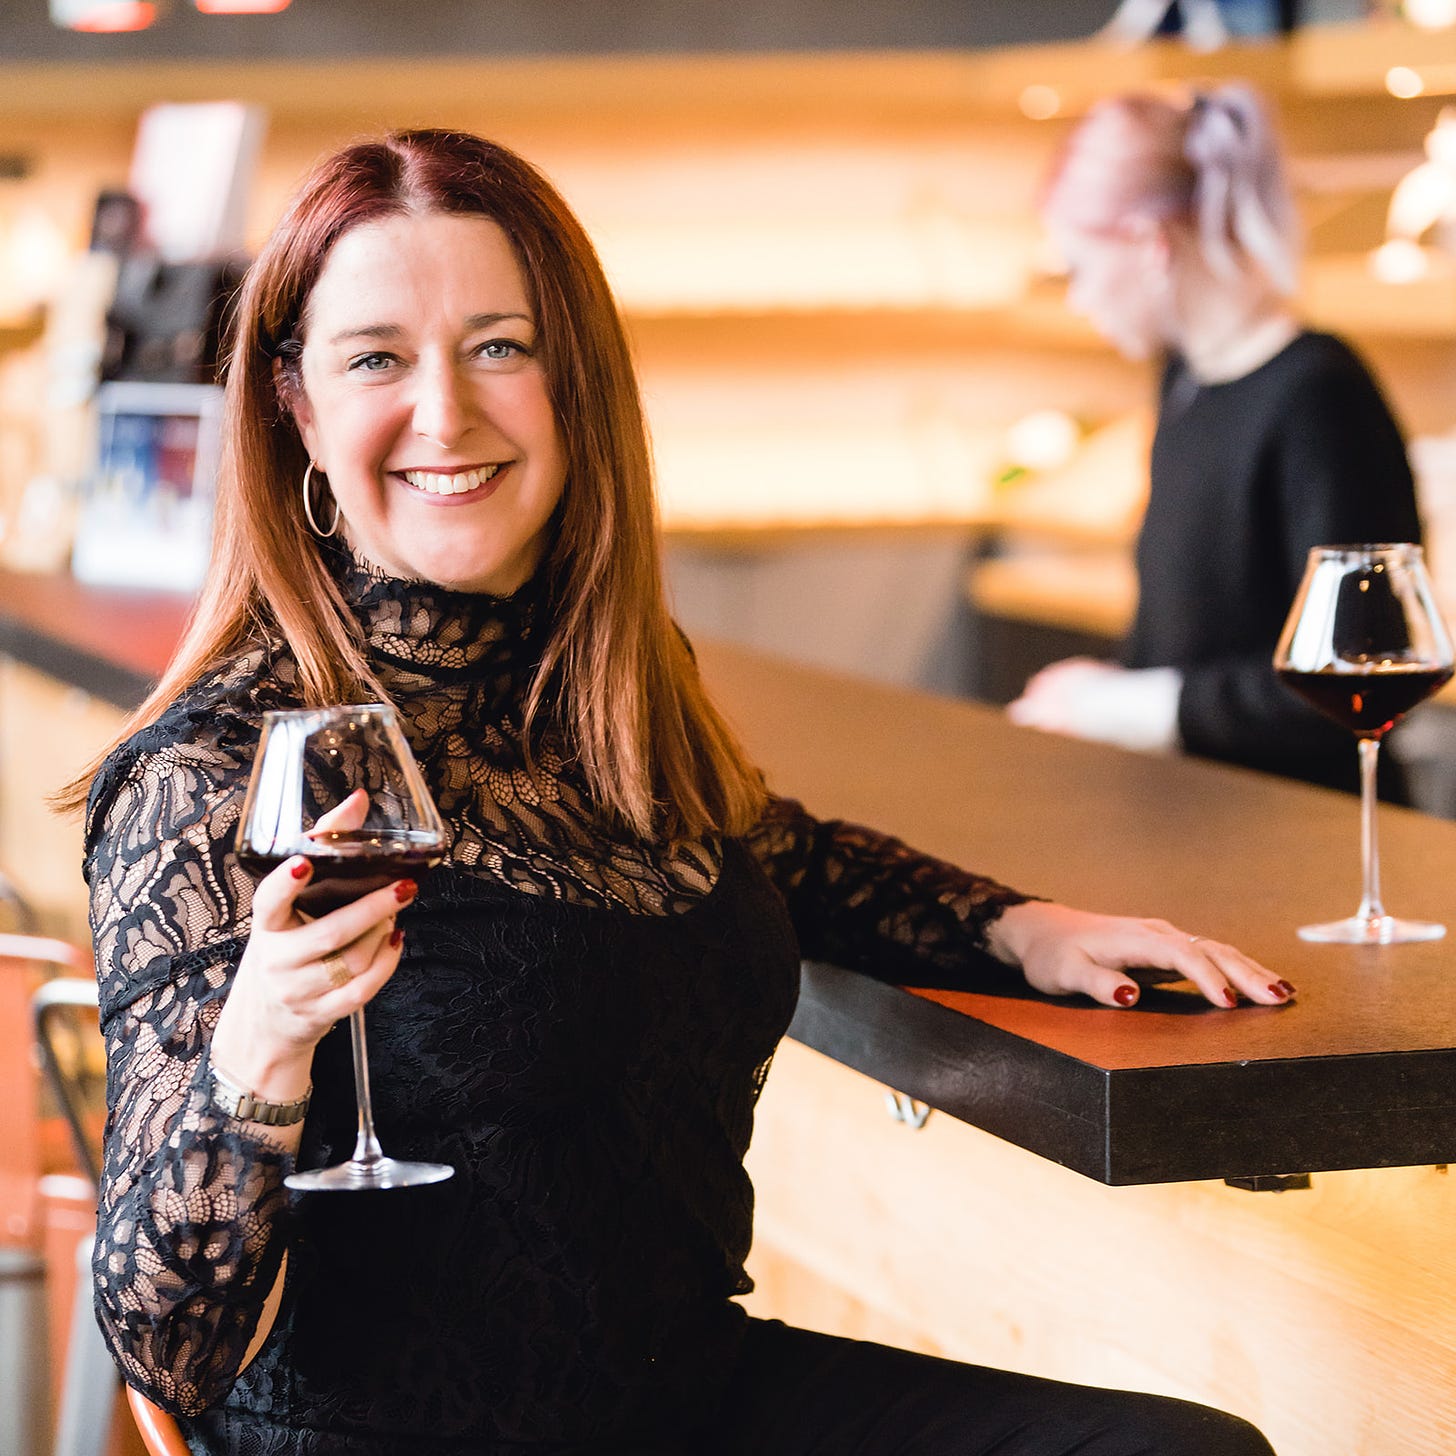 A woman dressed in black sitting at a bar holding up a glass of red wine. 